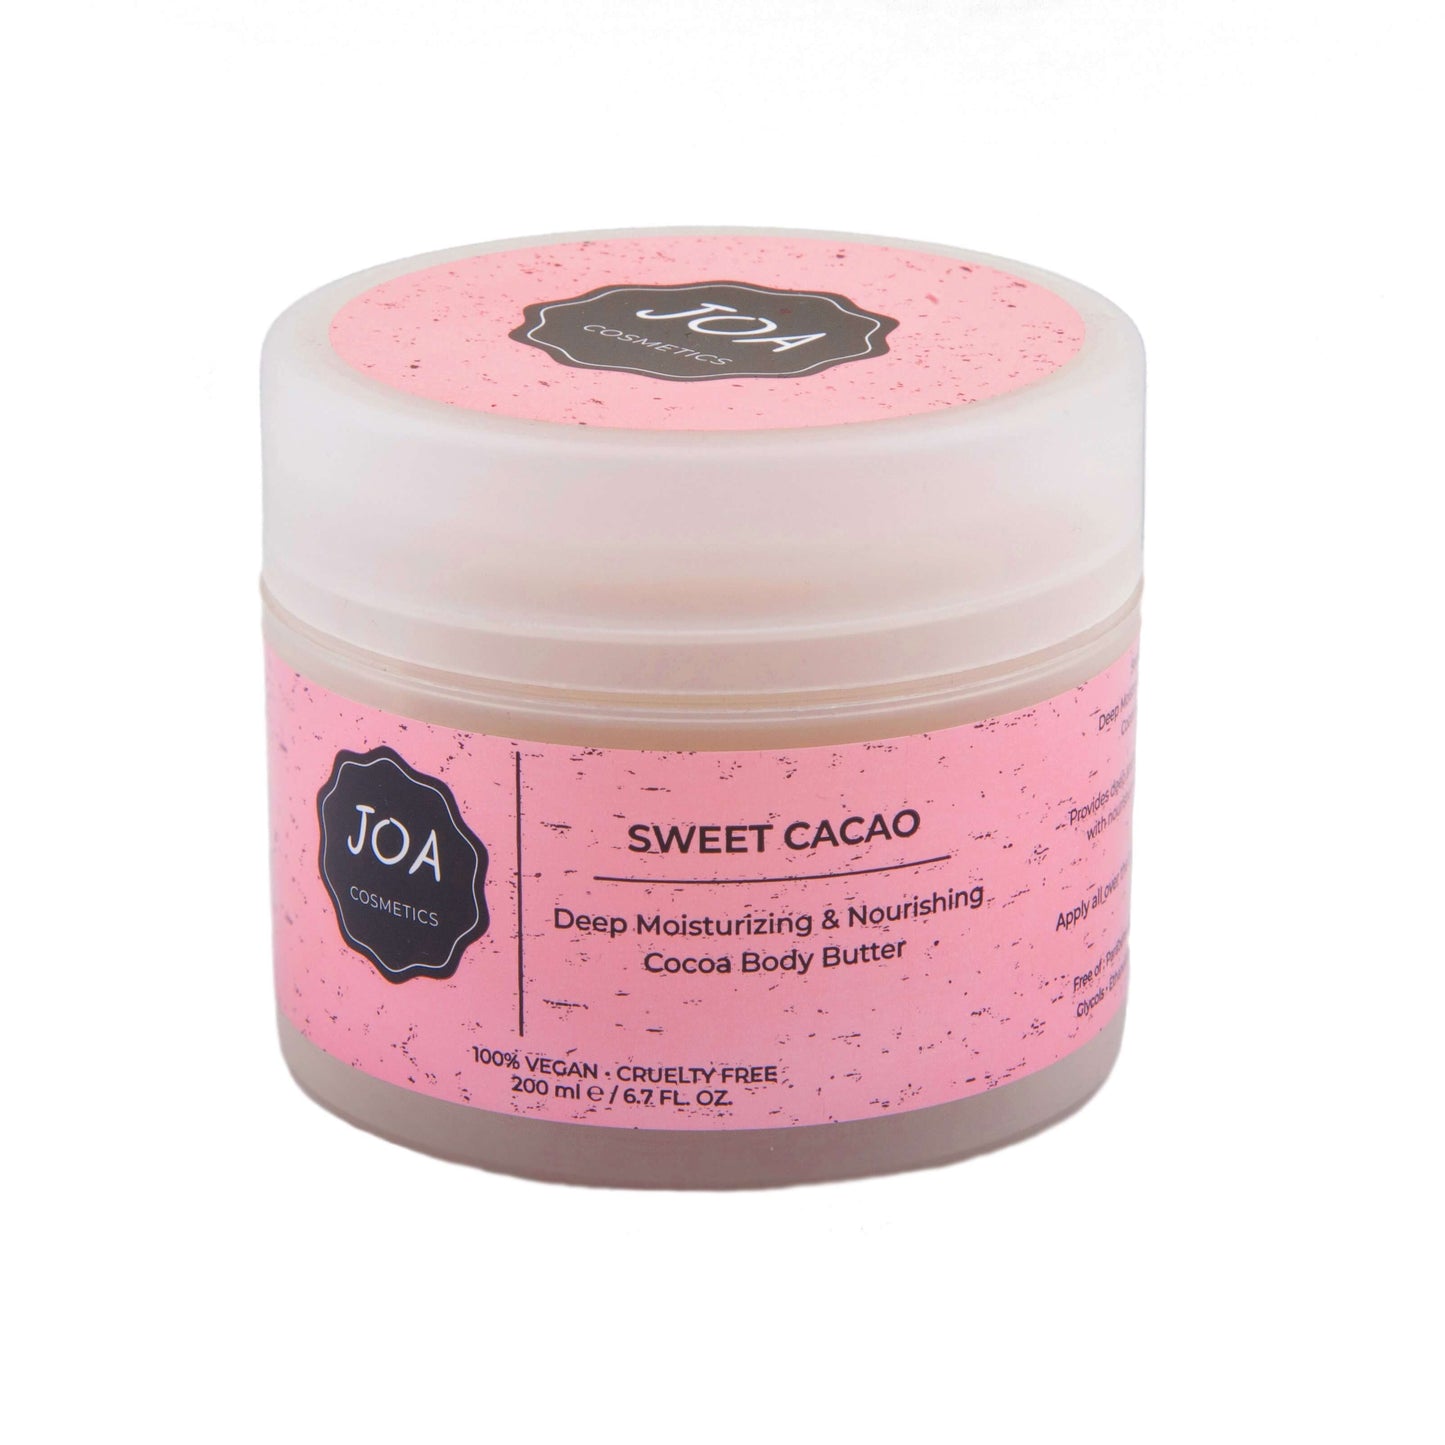 Deep Moisturizing & Nourishing Cocoa Body Butter 200 ml. 100% Vegan - Cruelty Free. Provides deep and soothing hydration along with nourishement for very dry skin. Free of: Parabens, Mineral Oil, Propylene Glycols, Ethanolamine, Triethinolamine.